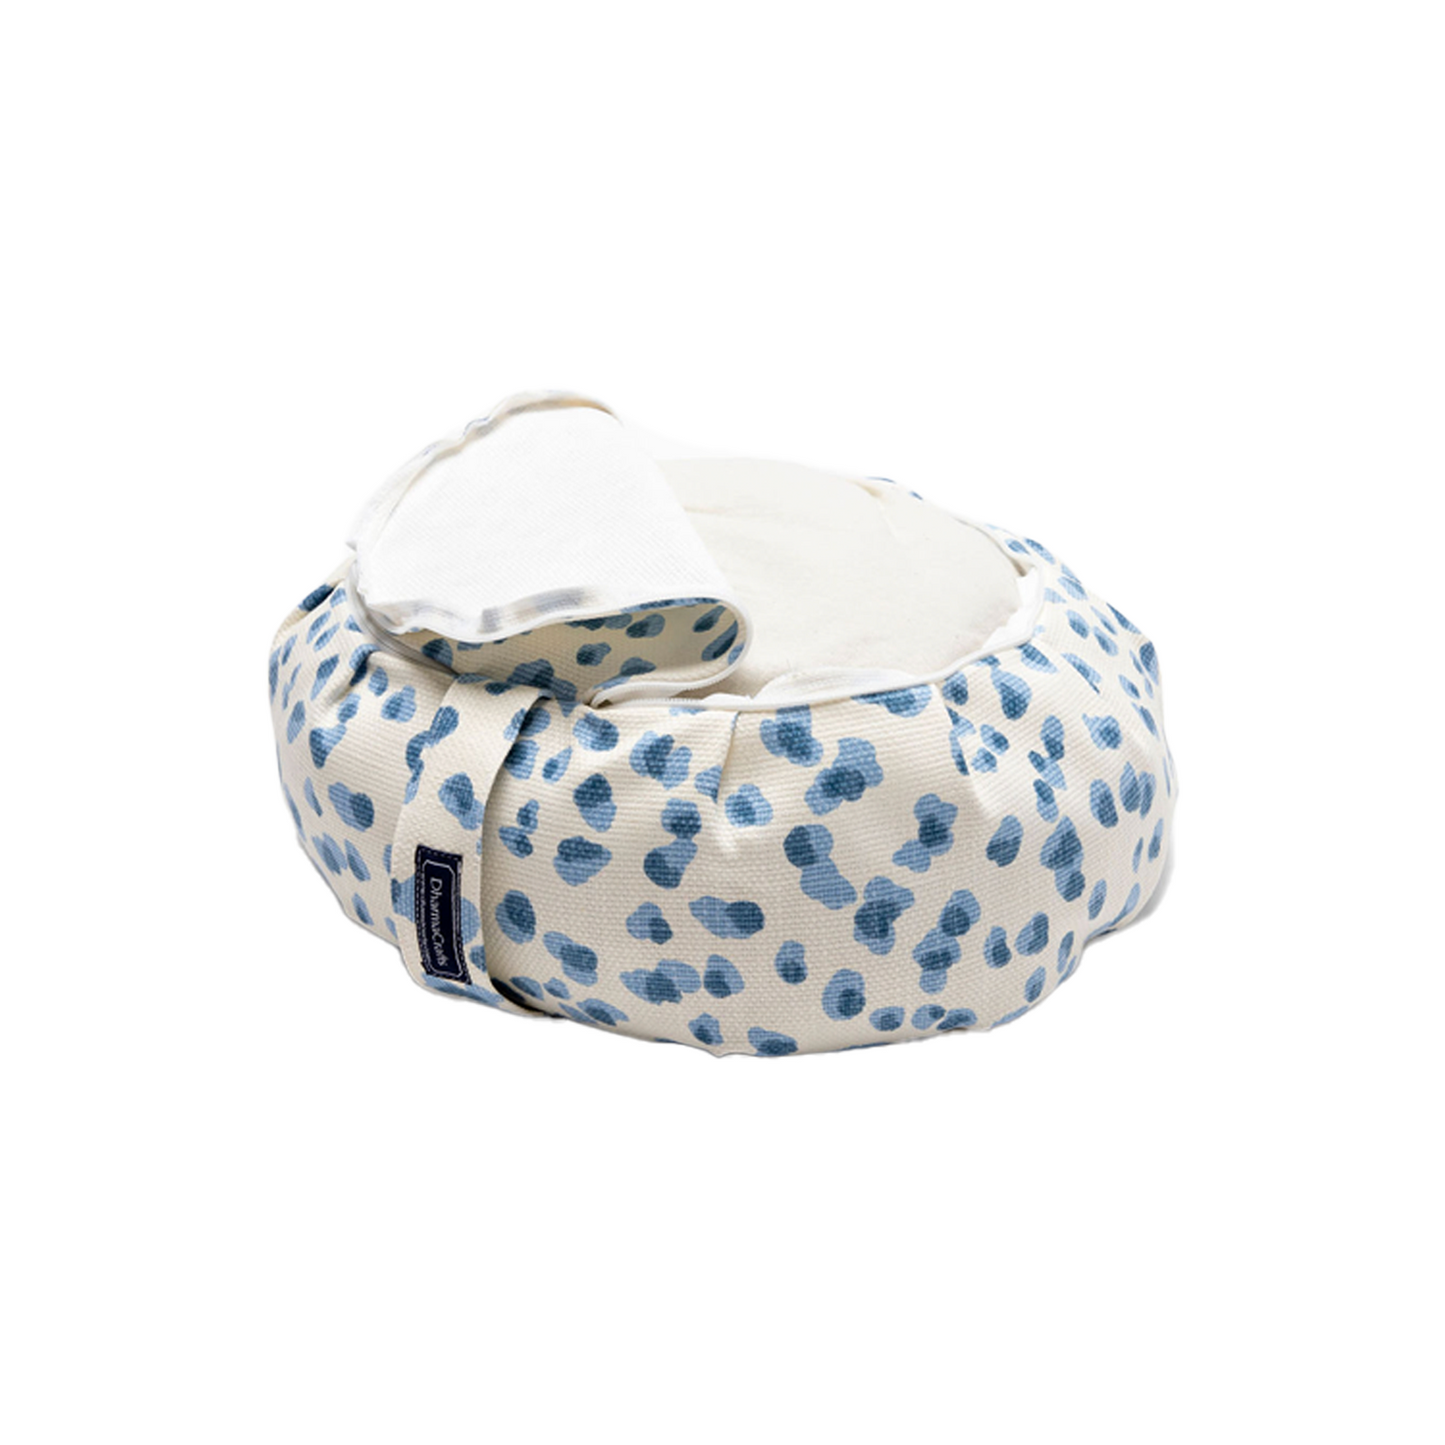 Polka Dot Zafu on white backdrop. The cover is unzipped and folded back partially to show the cushion inside.